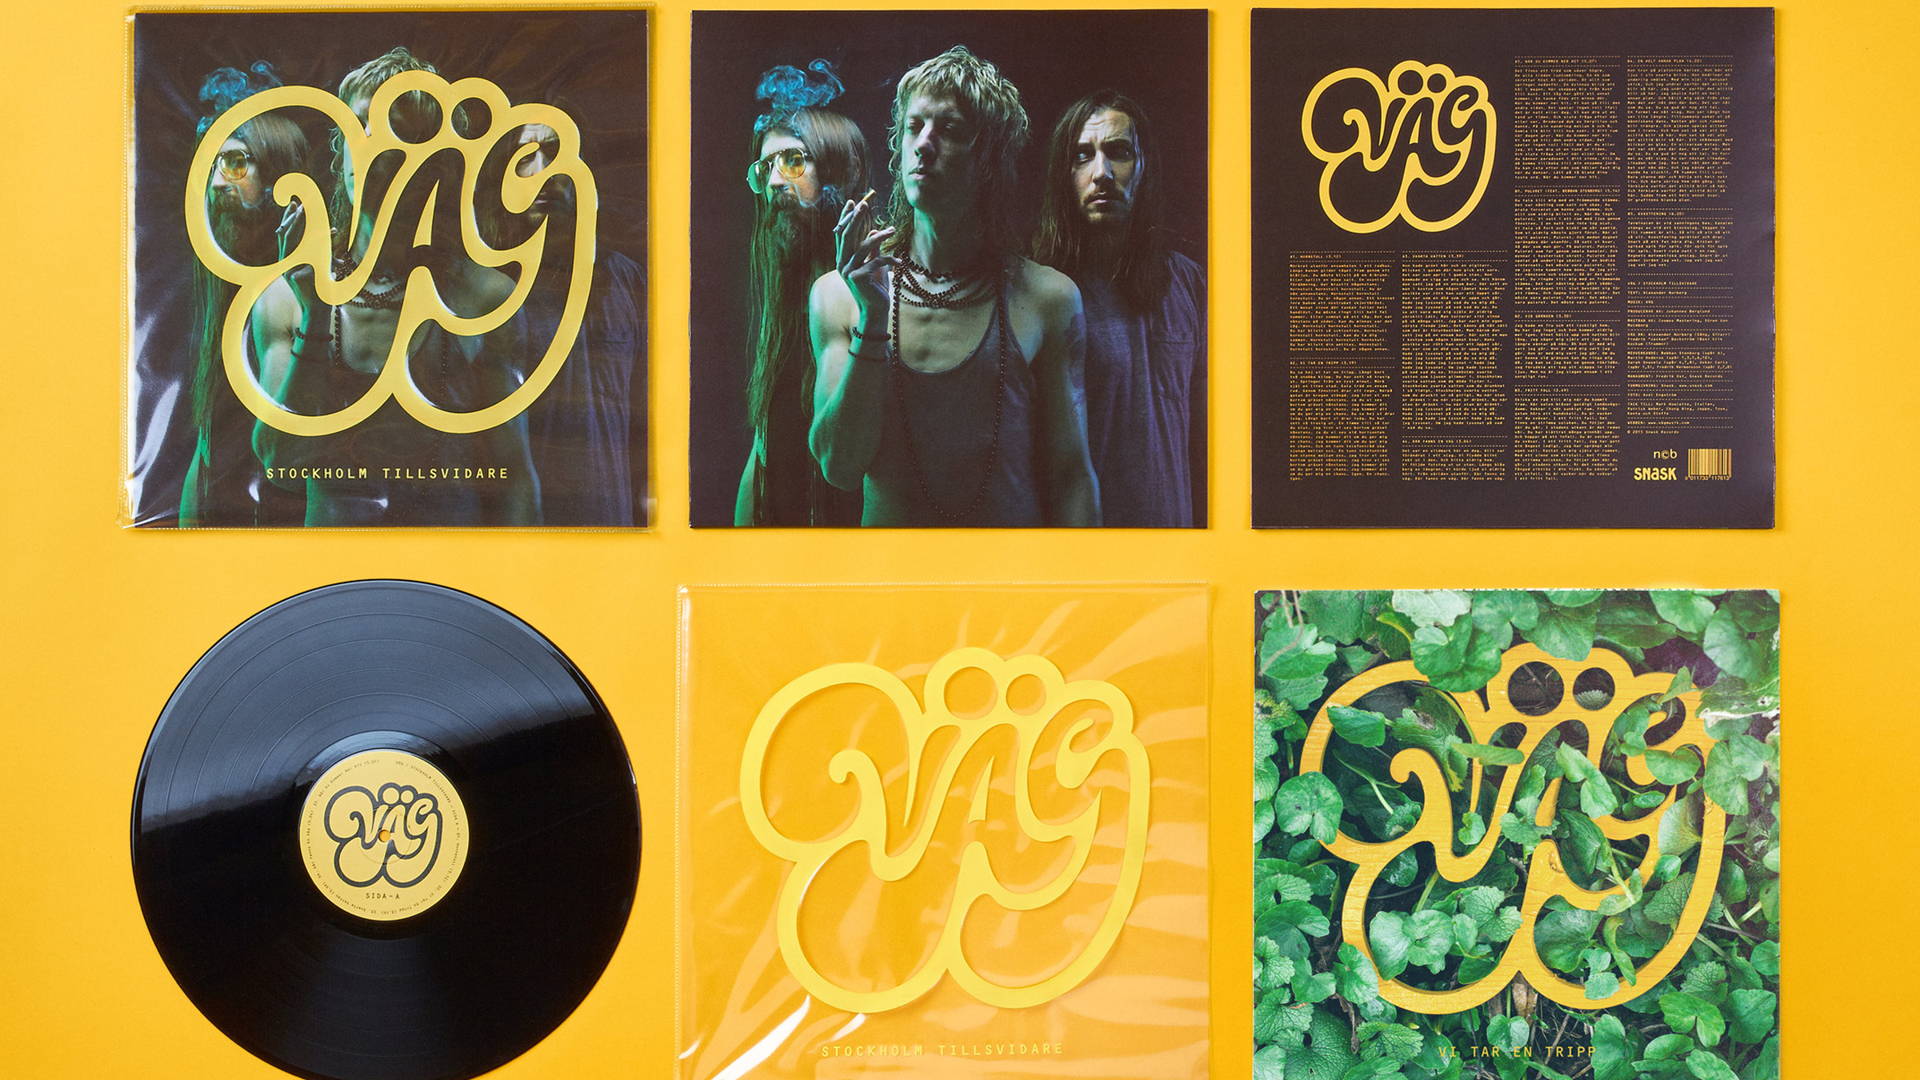 Featured image for VÄG, the Swedish psychedelic rock band